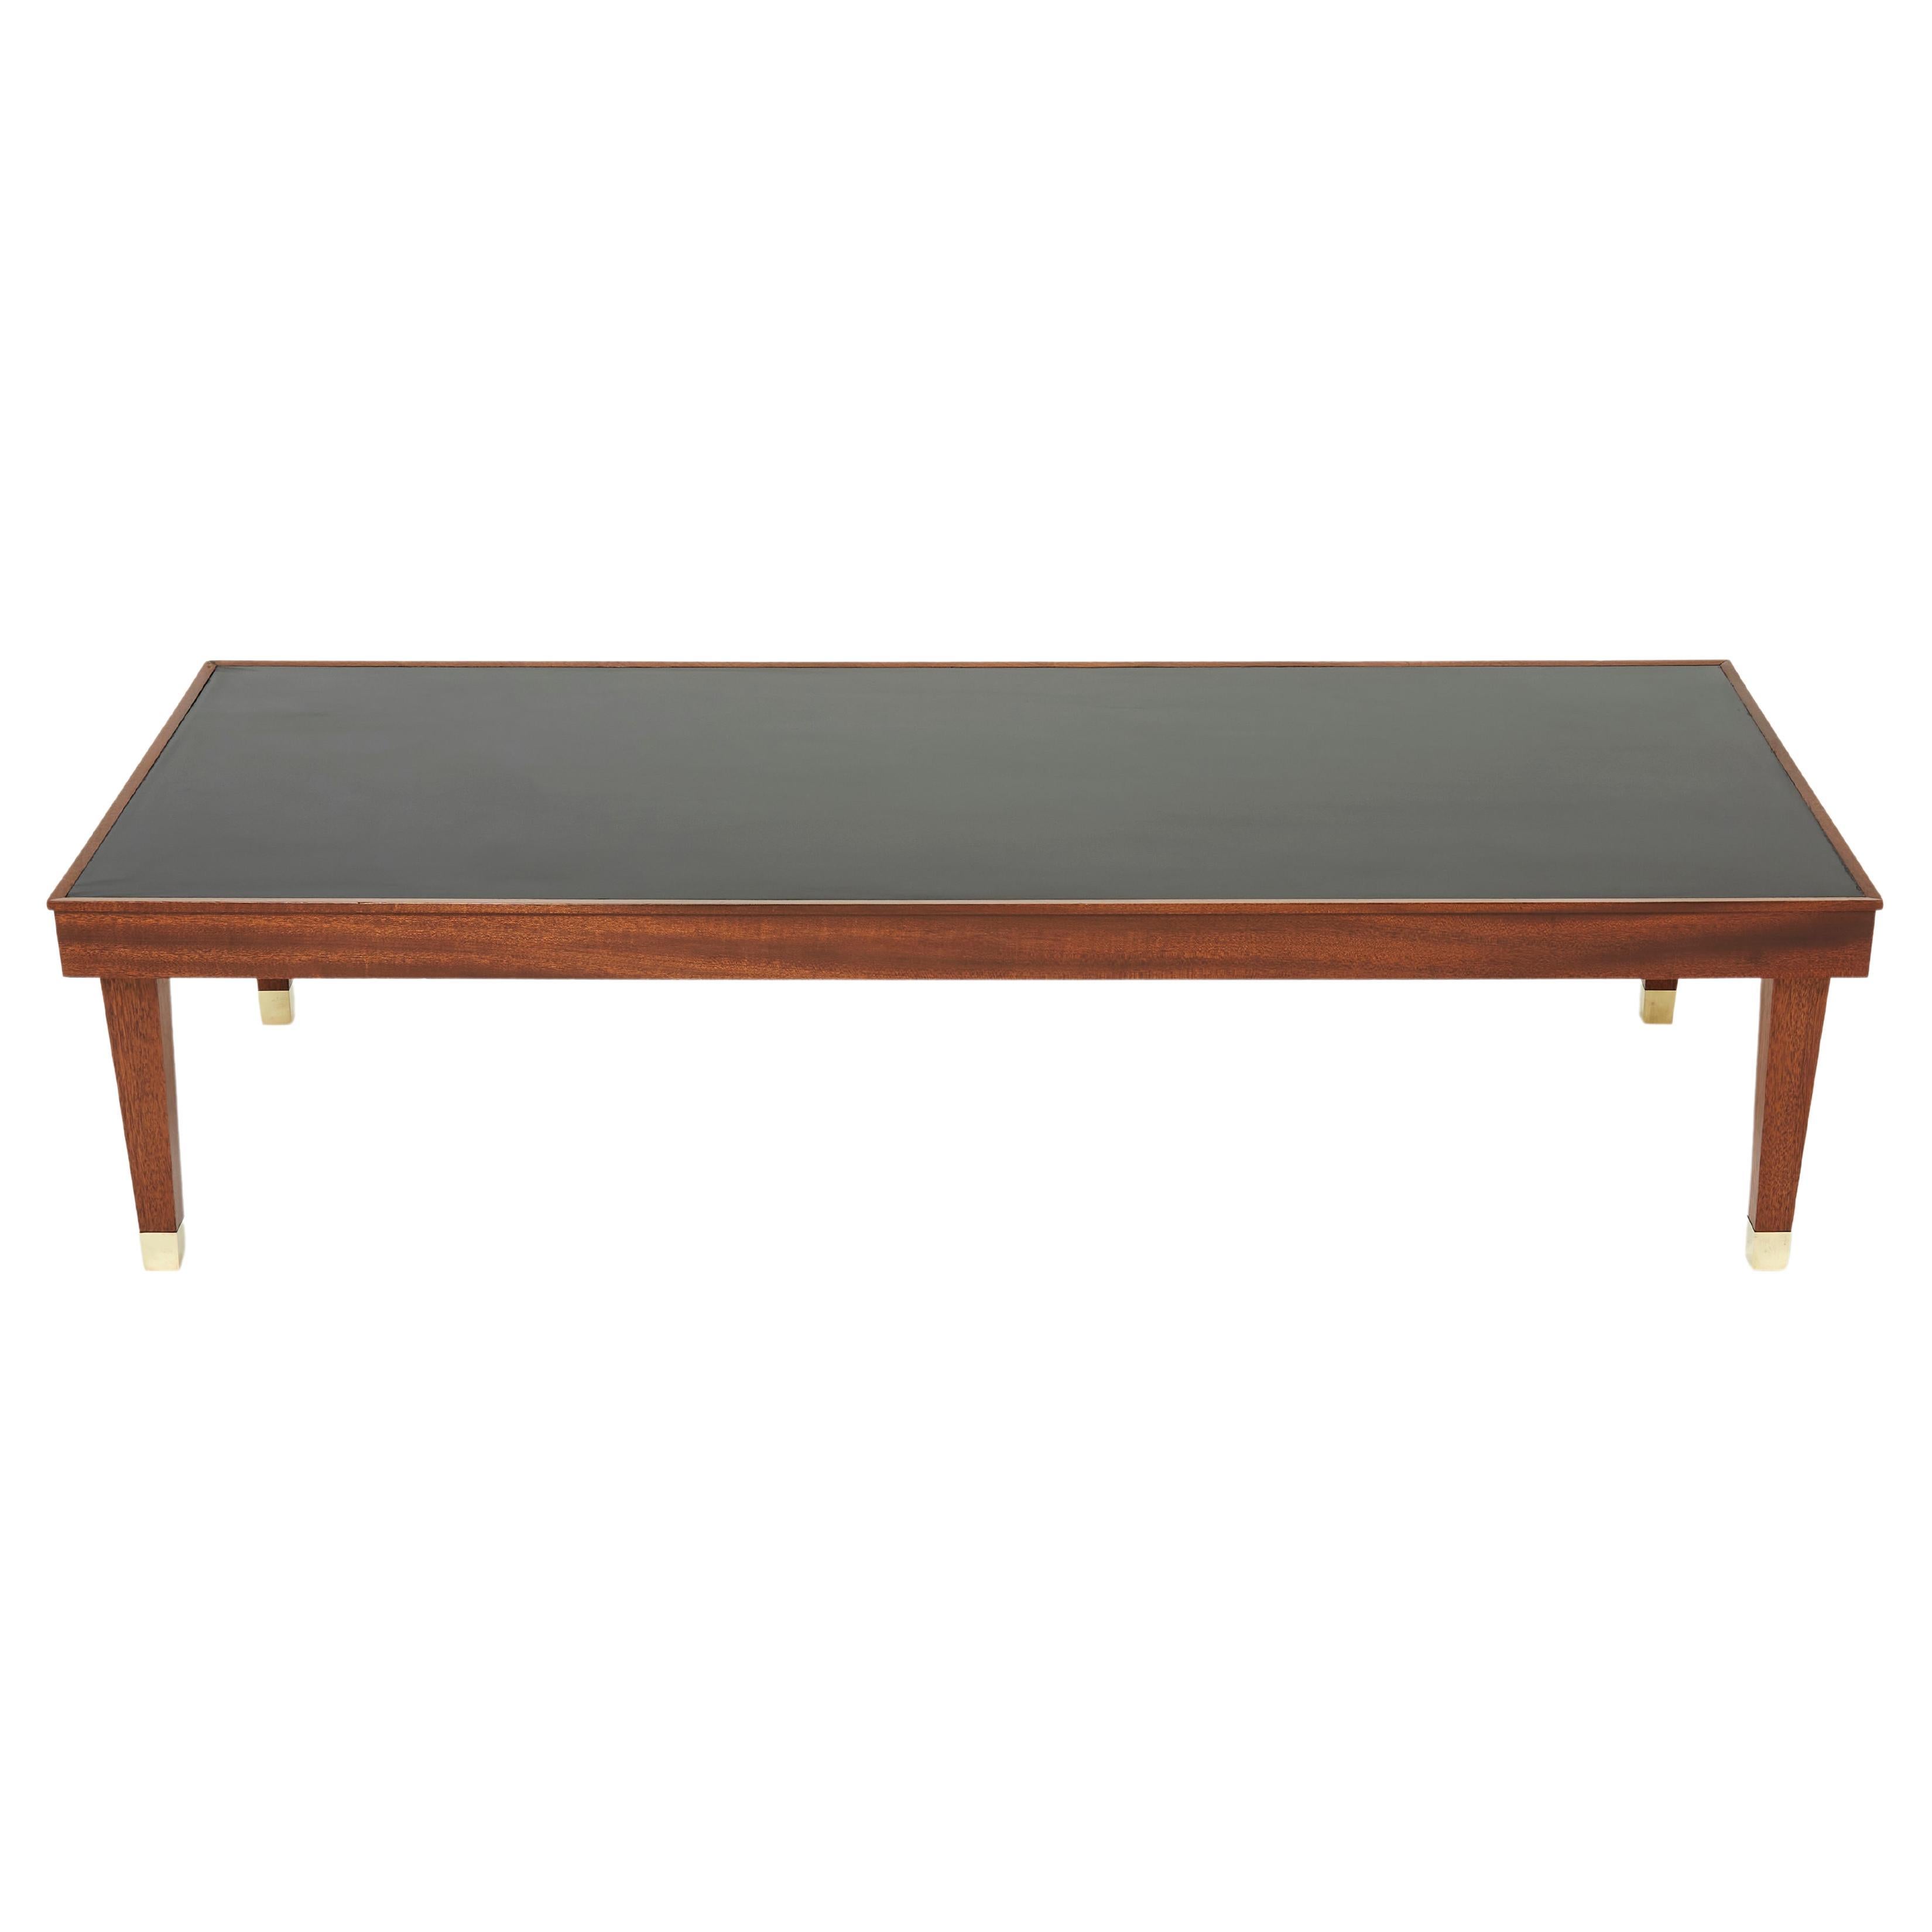 Jacques Adnet Mahogany Brass Modernist Coffee Table, 1950s For Sale